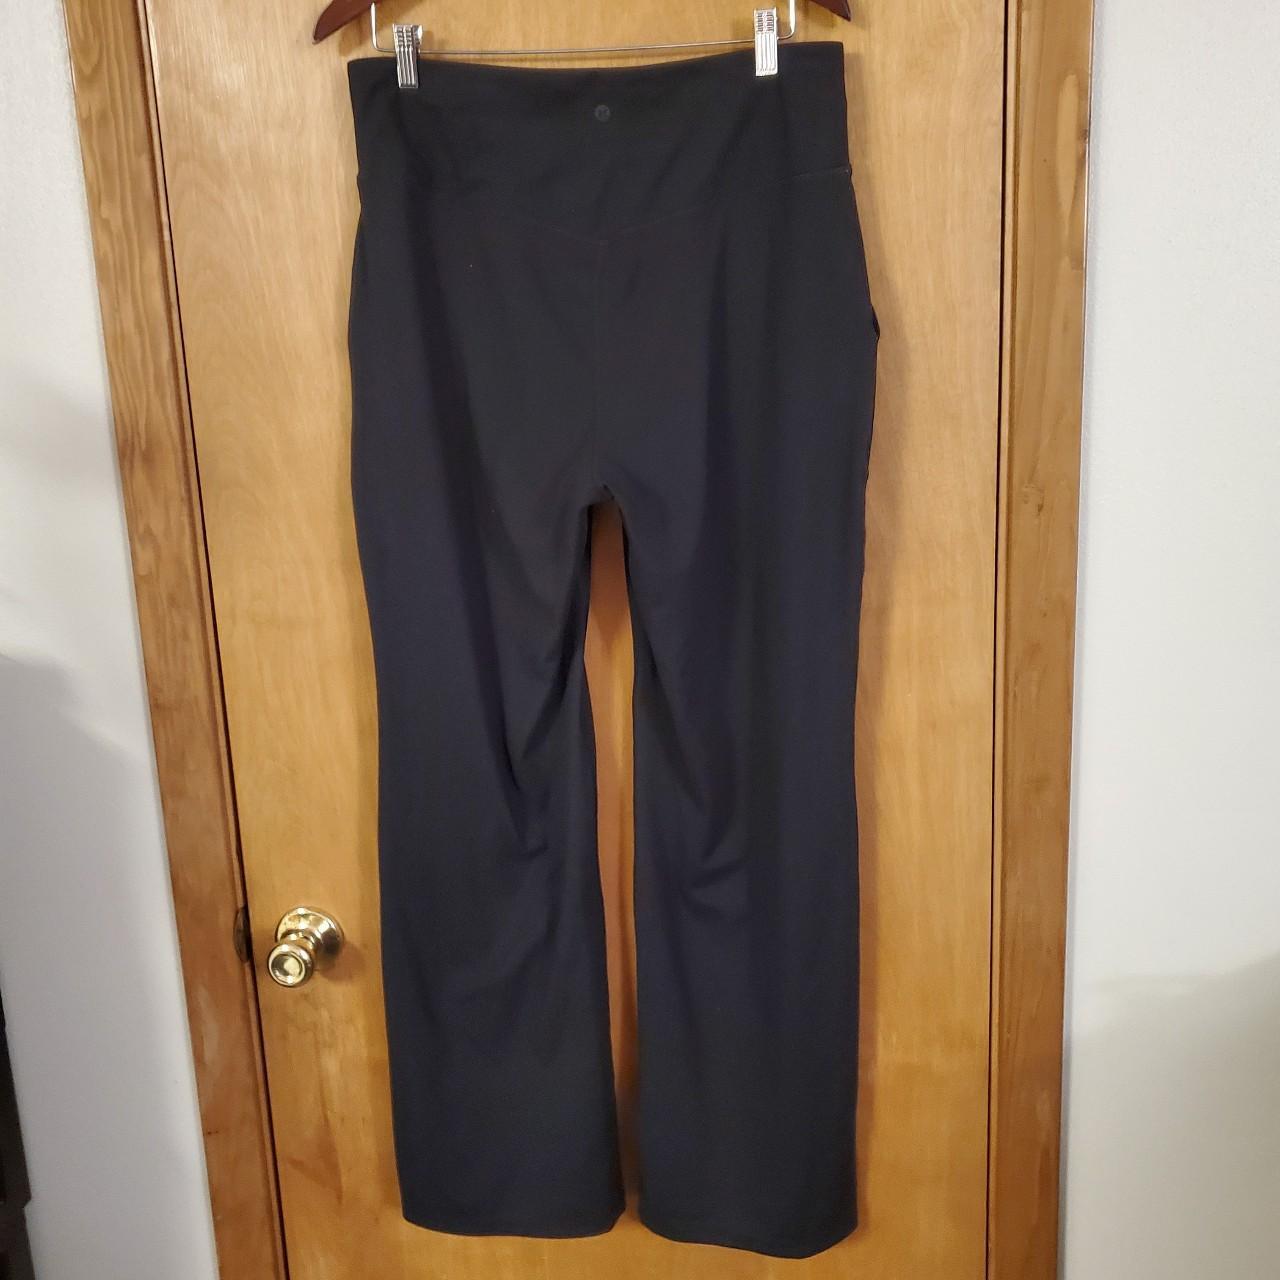 RBX high-waisted yoga pants in size XL are perfect - Depop